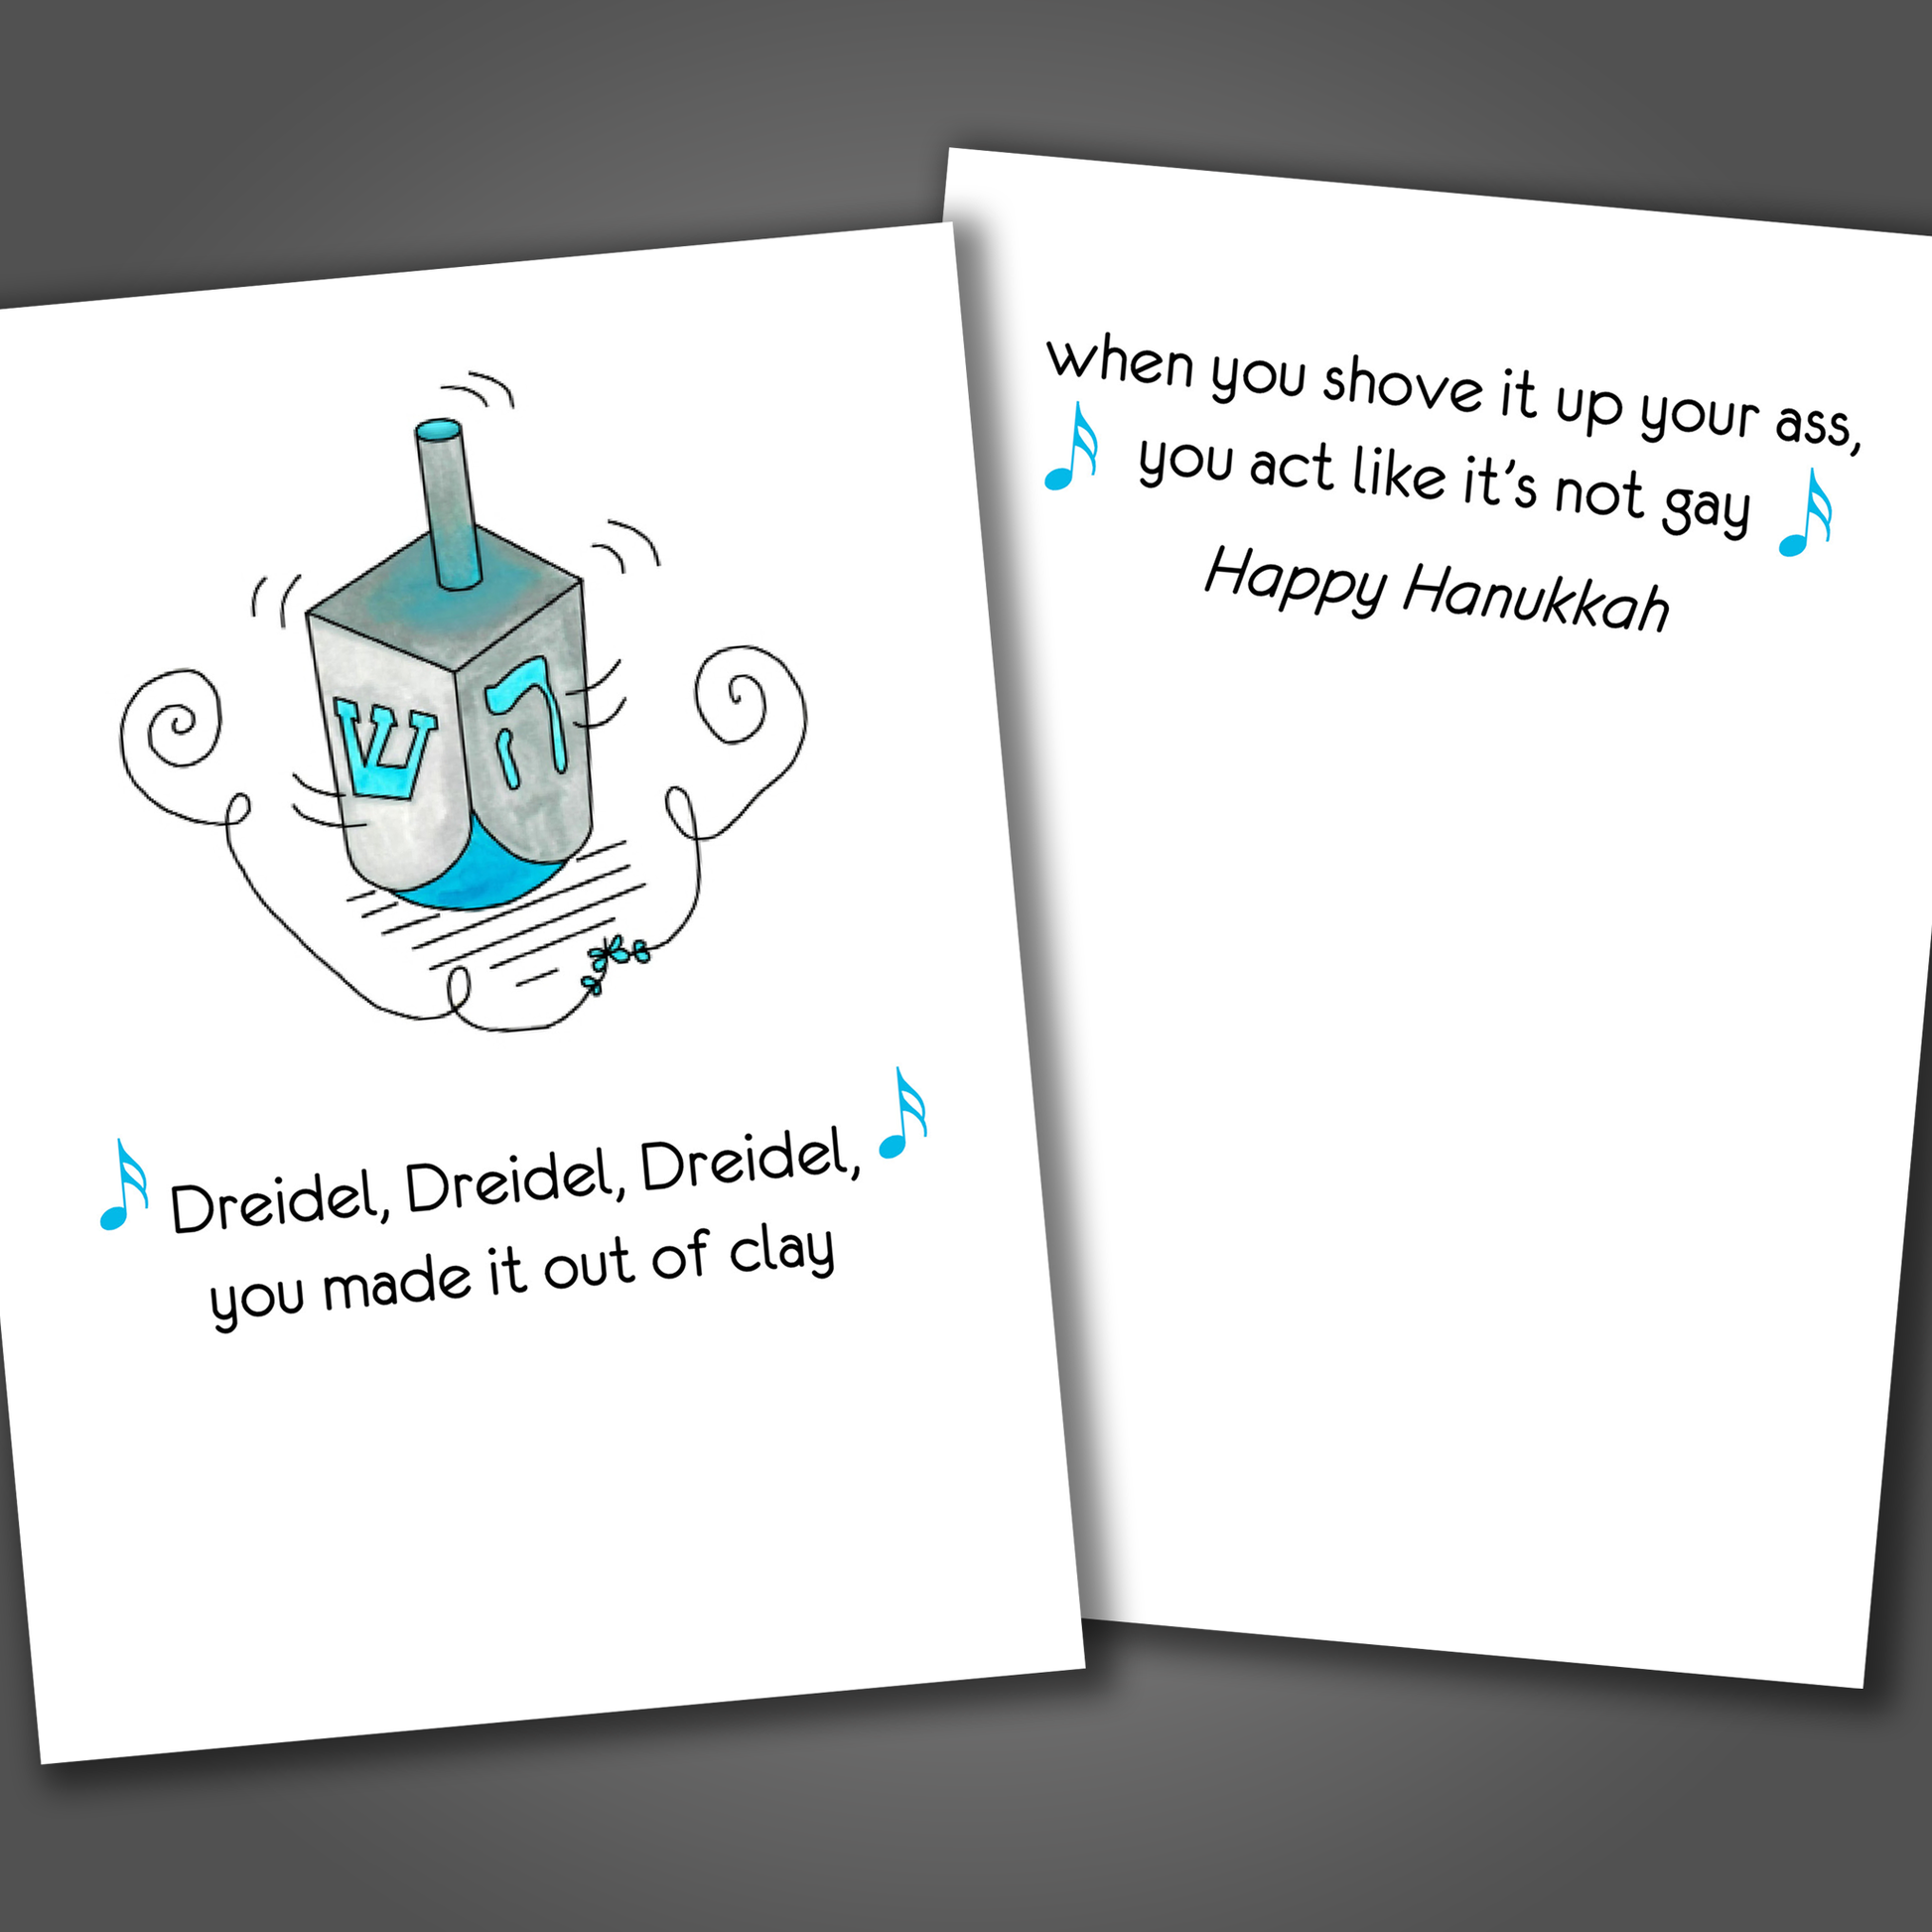 Funny Hanukkah card with a dreidel drawn on the front of the card. Inside the card is a funny joke that says when you shove it up your ass you act like it's not gay!